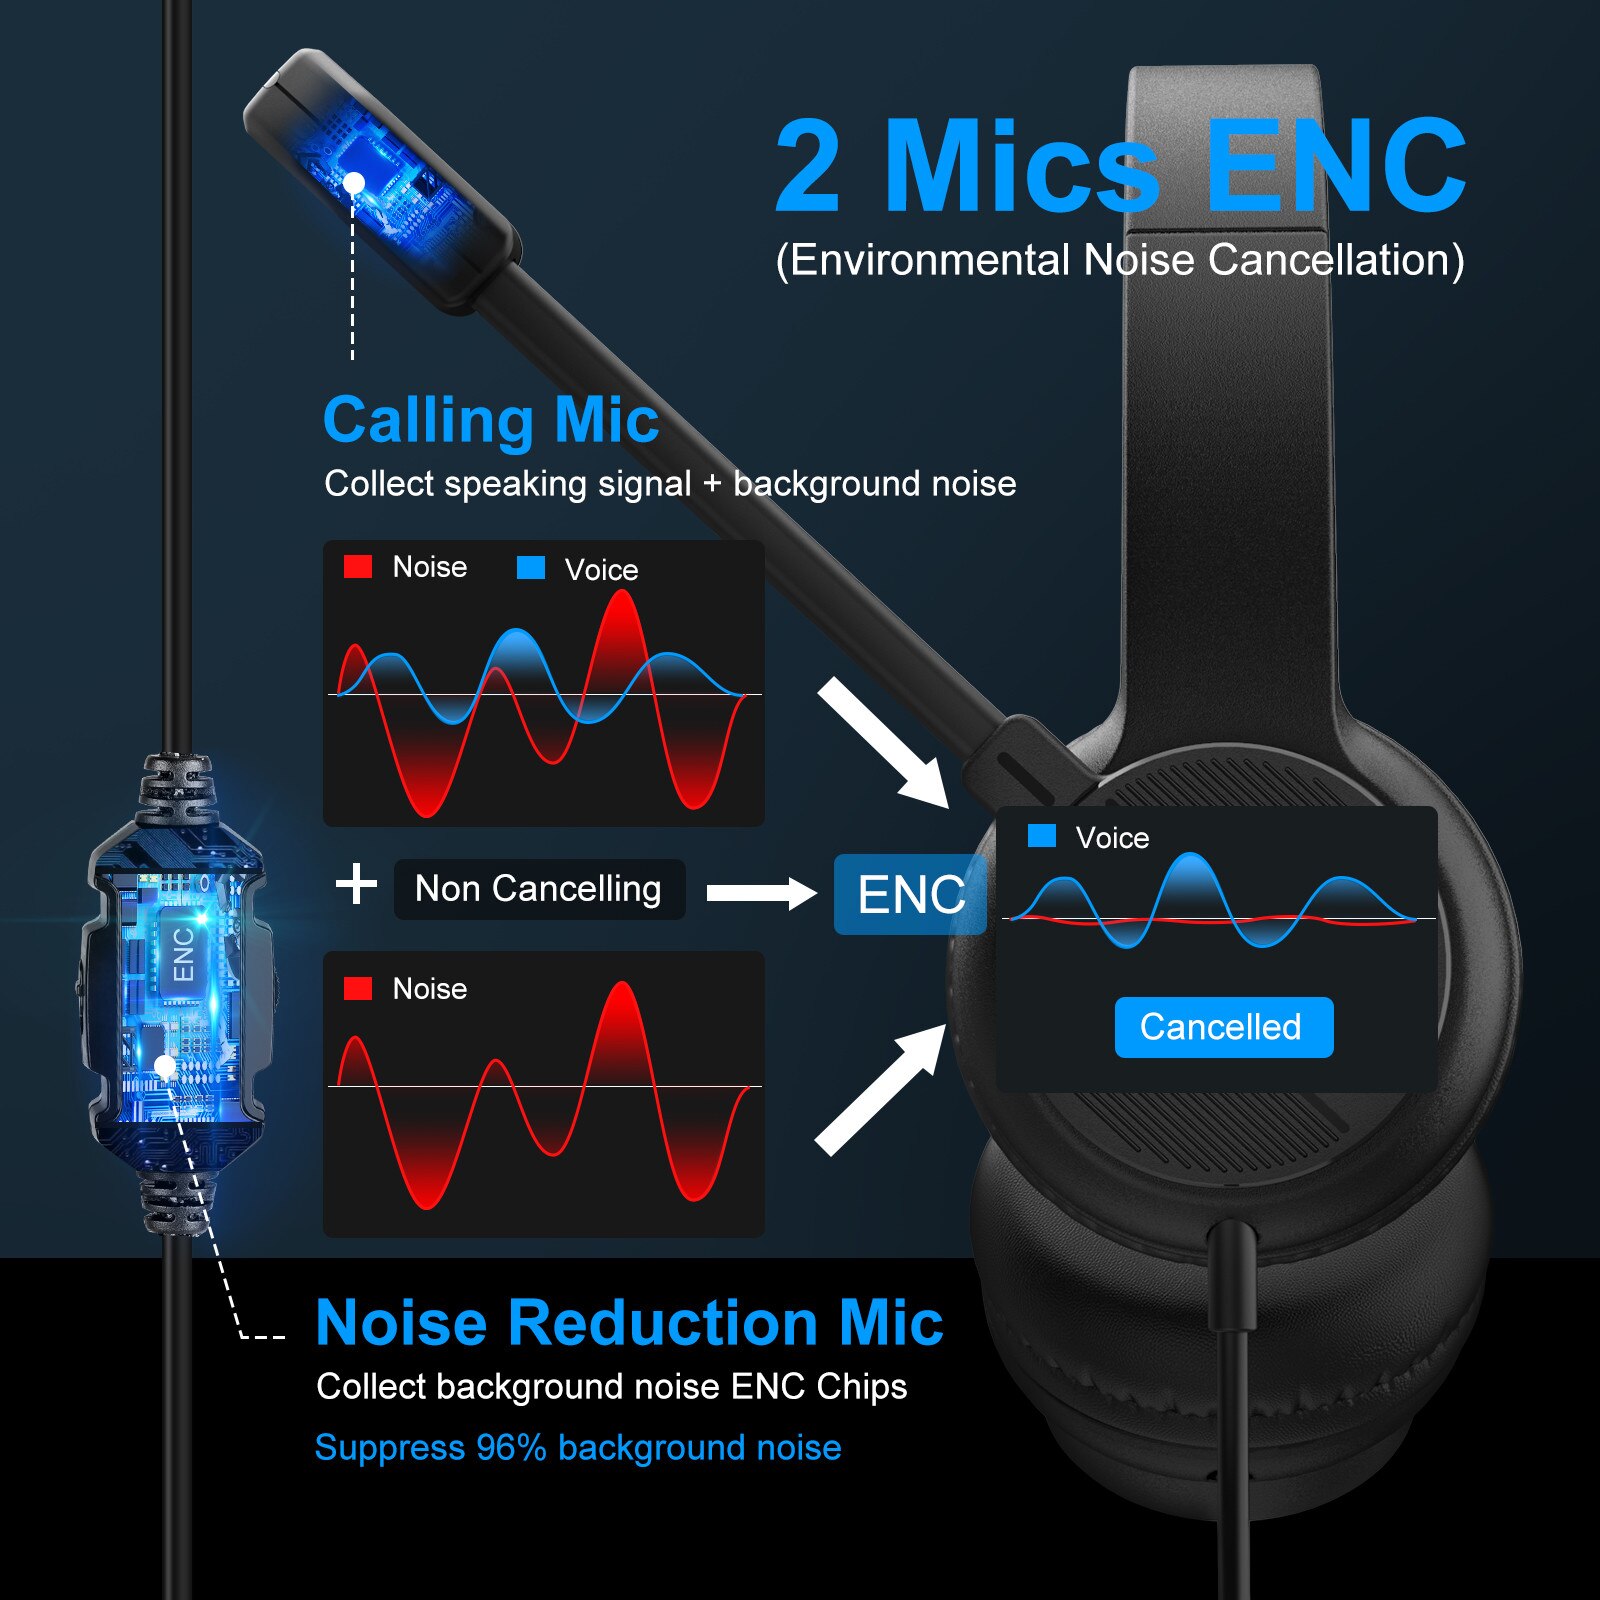 EKSA H12E Headset with Noise Cancelling Mic